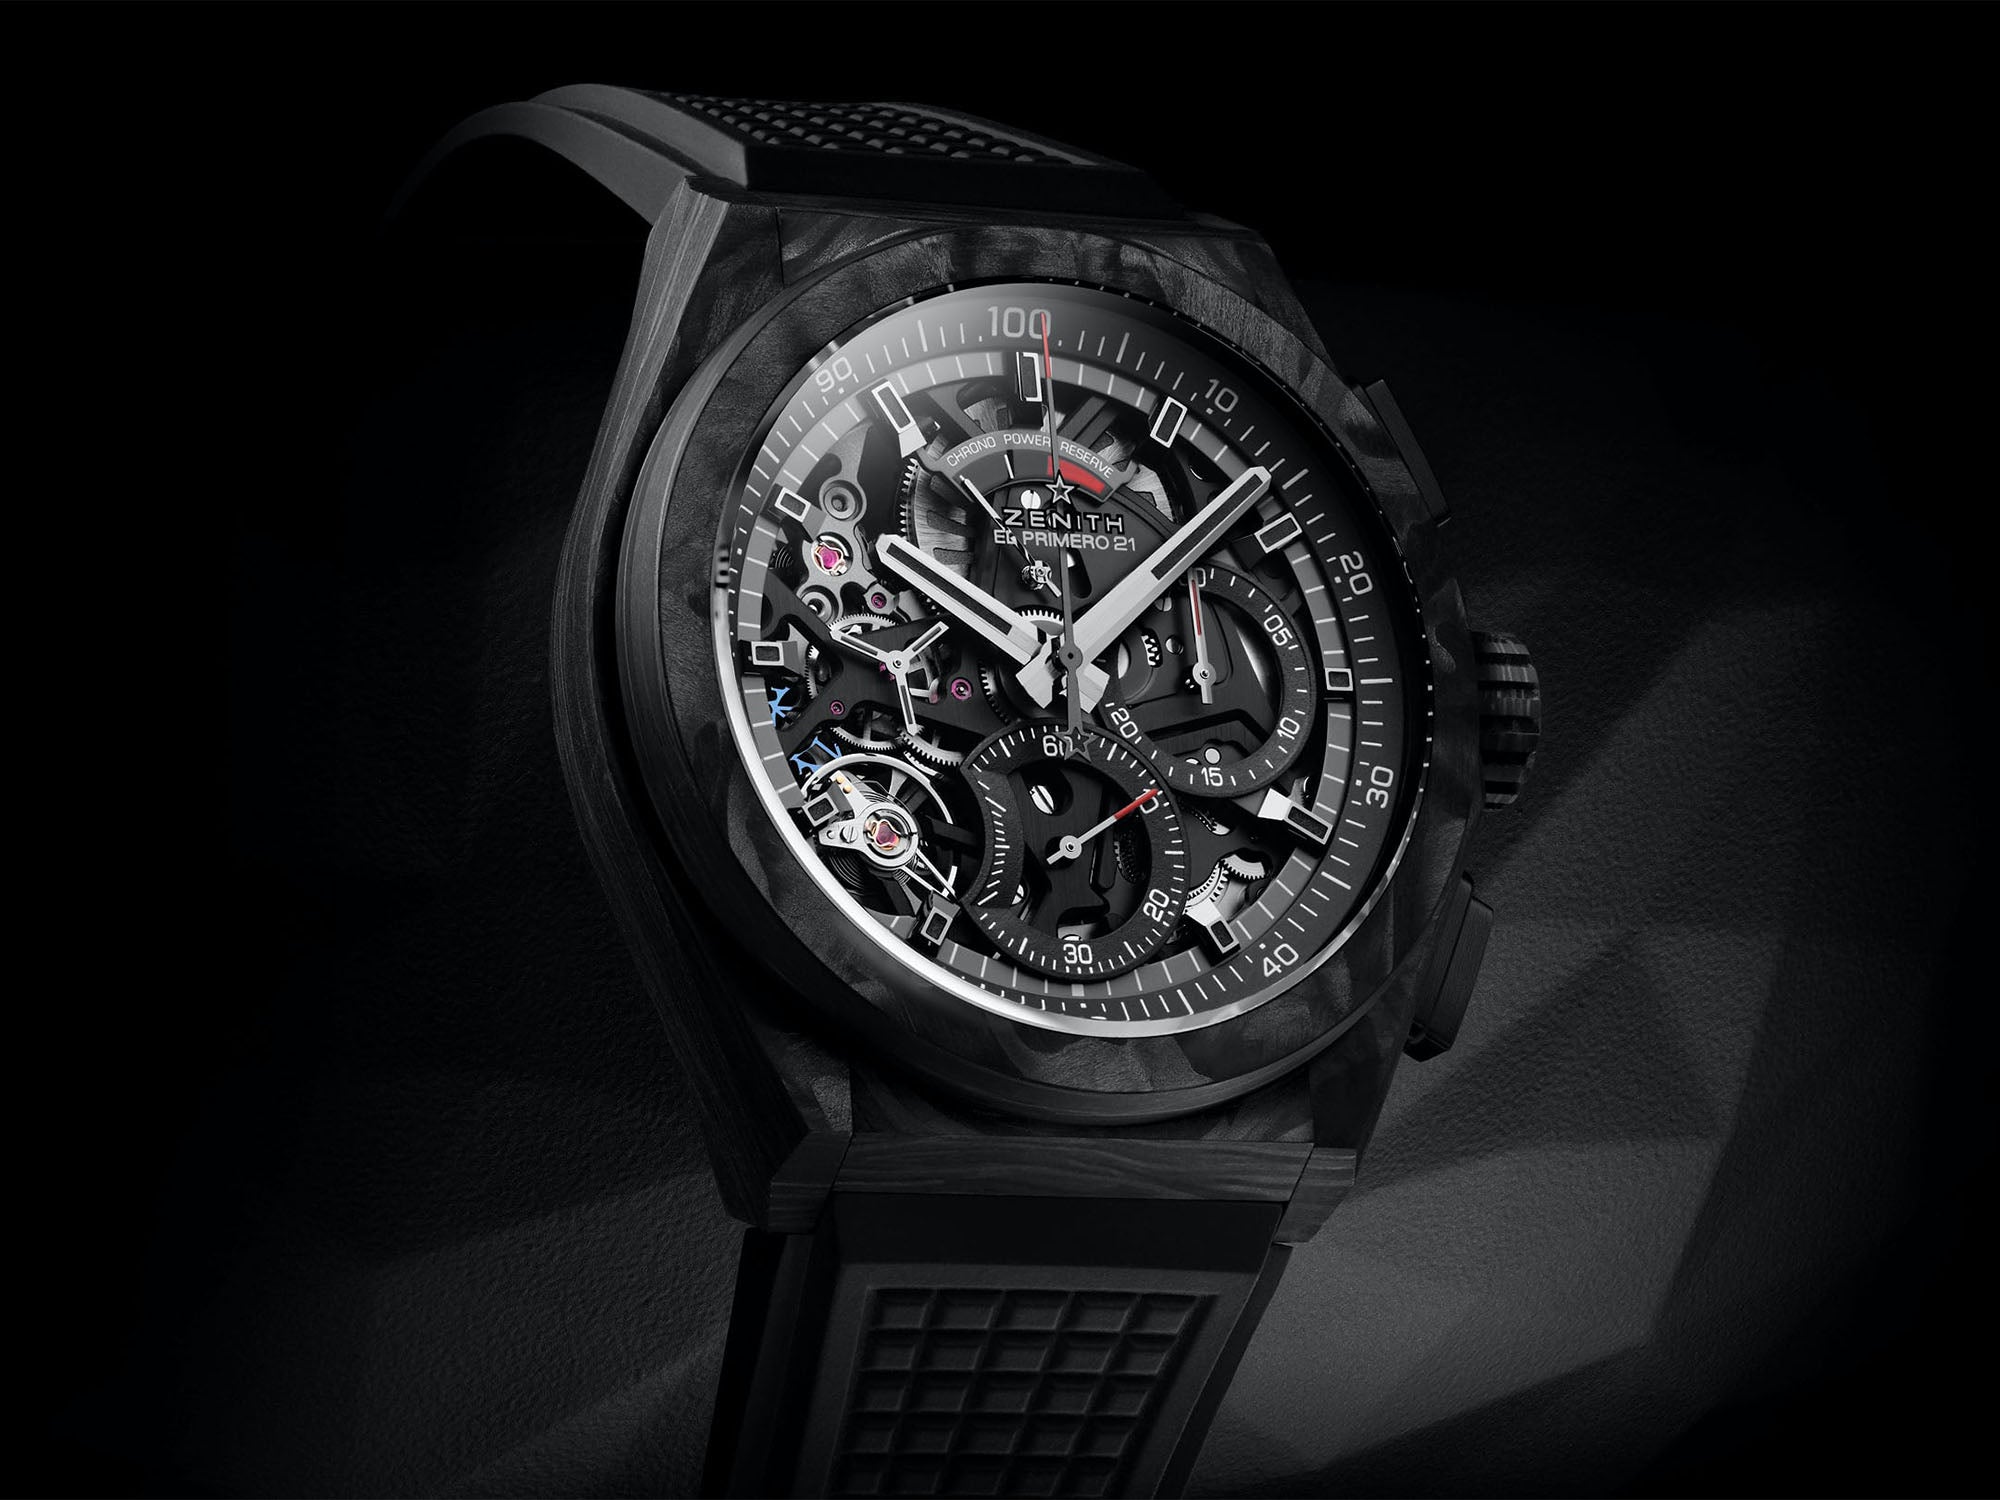 Zenith Unveils Limited-Edition Defy Revival A3642 Watch